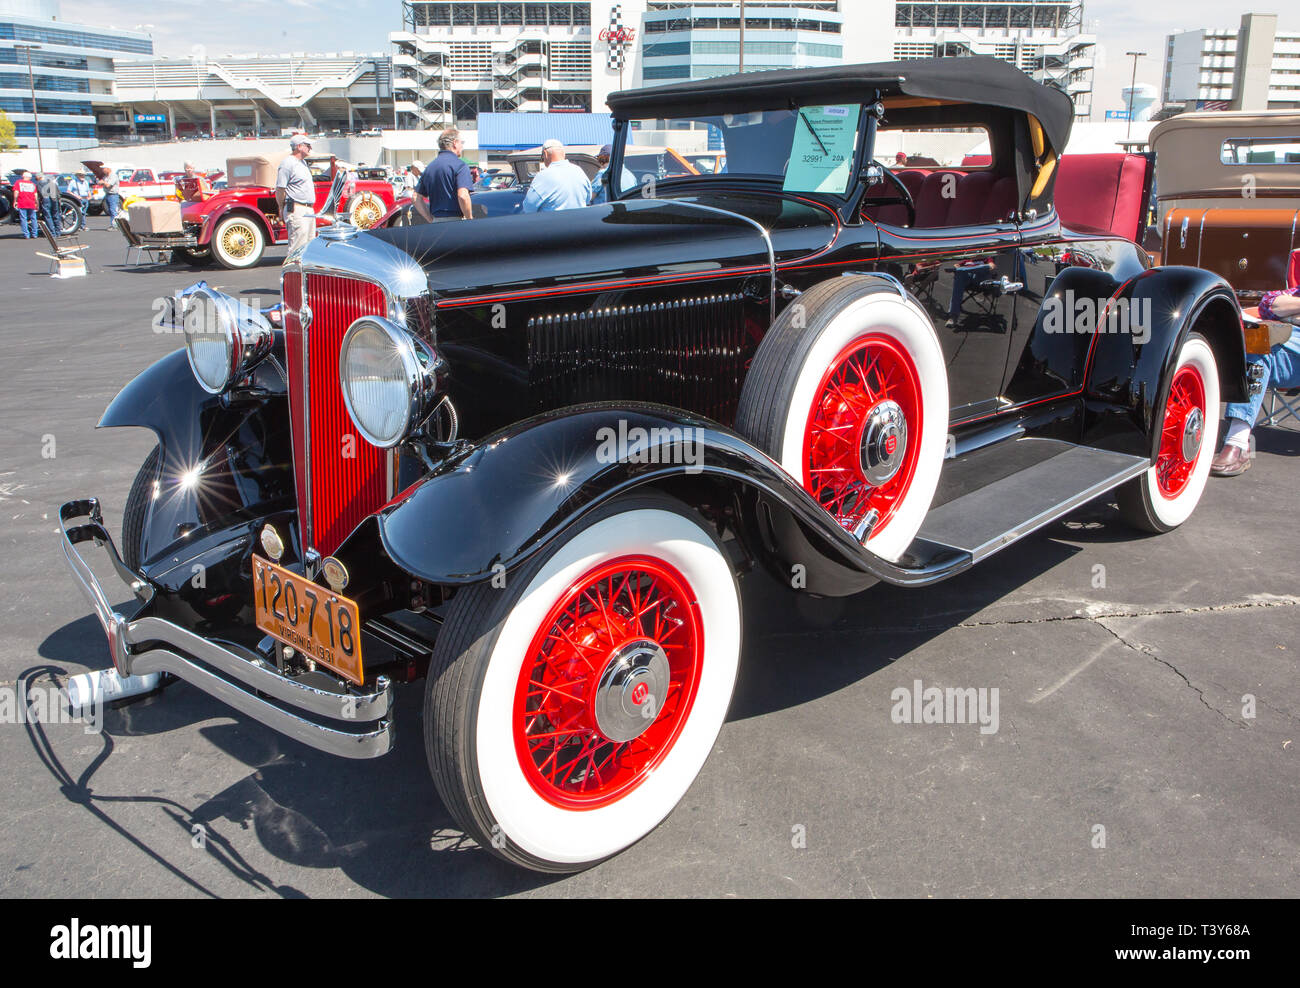 CONCORD, NC (USA) - April 6, 2019:  A 1931 Studebaker automobile on display at the Pennzoil AutoFair Classic Car Show at Charlotte Motor Speedway. Stock Photo